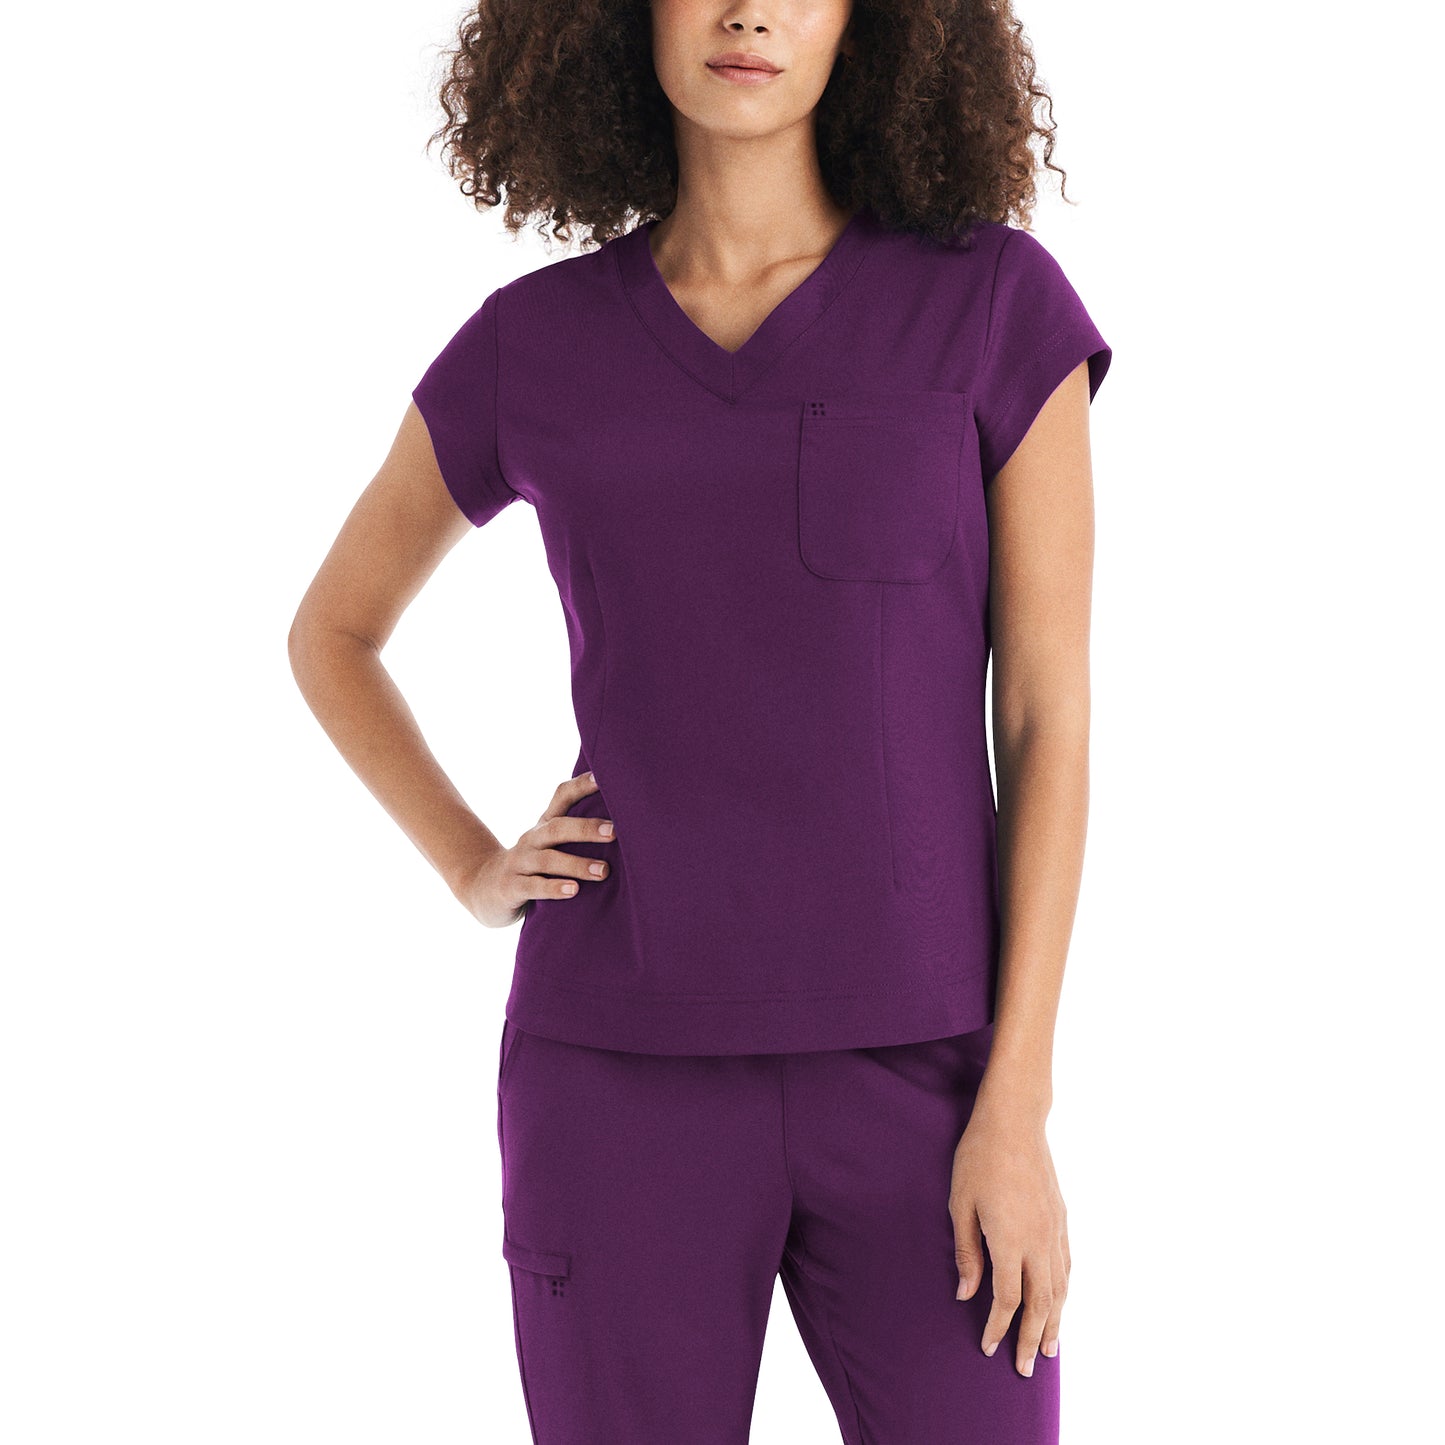 Women's V-neck top with a chest pocket - CRFT -  WC 128H